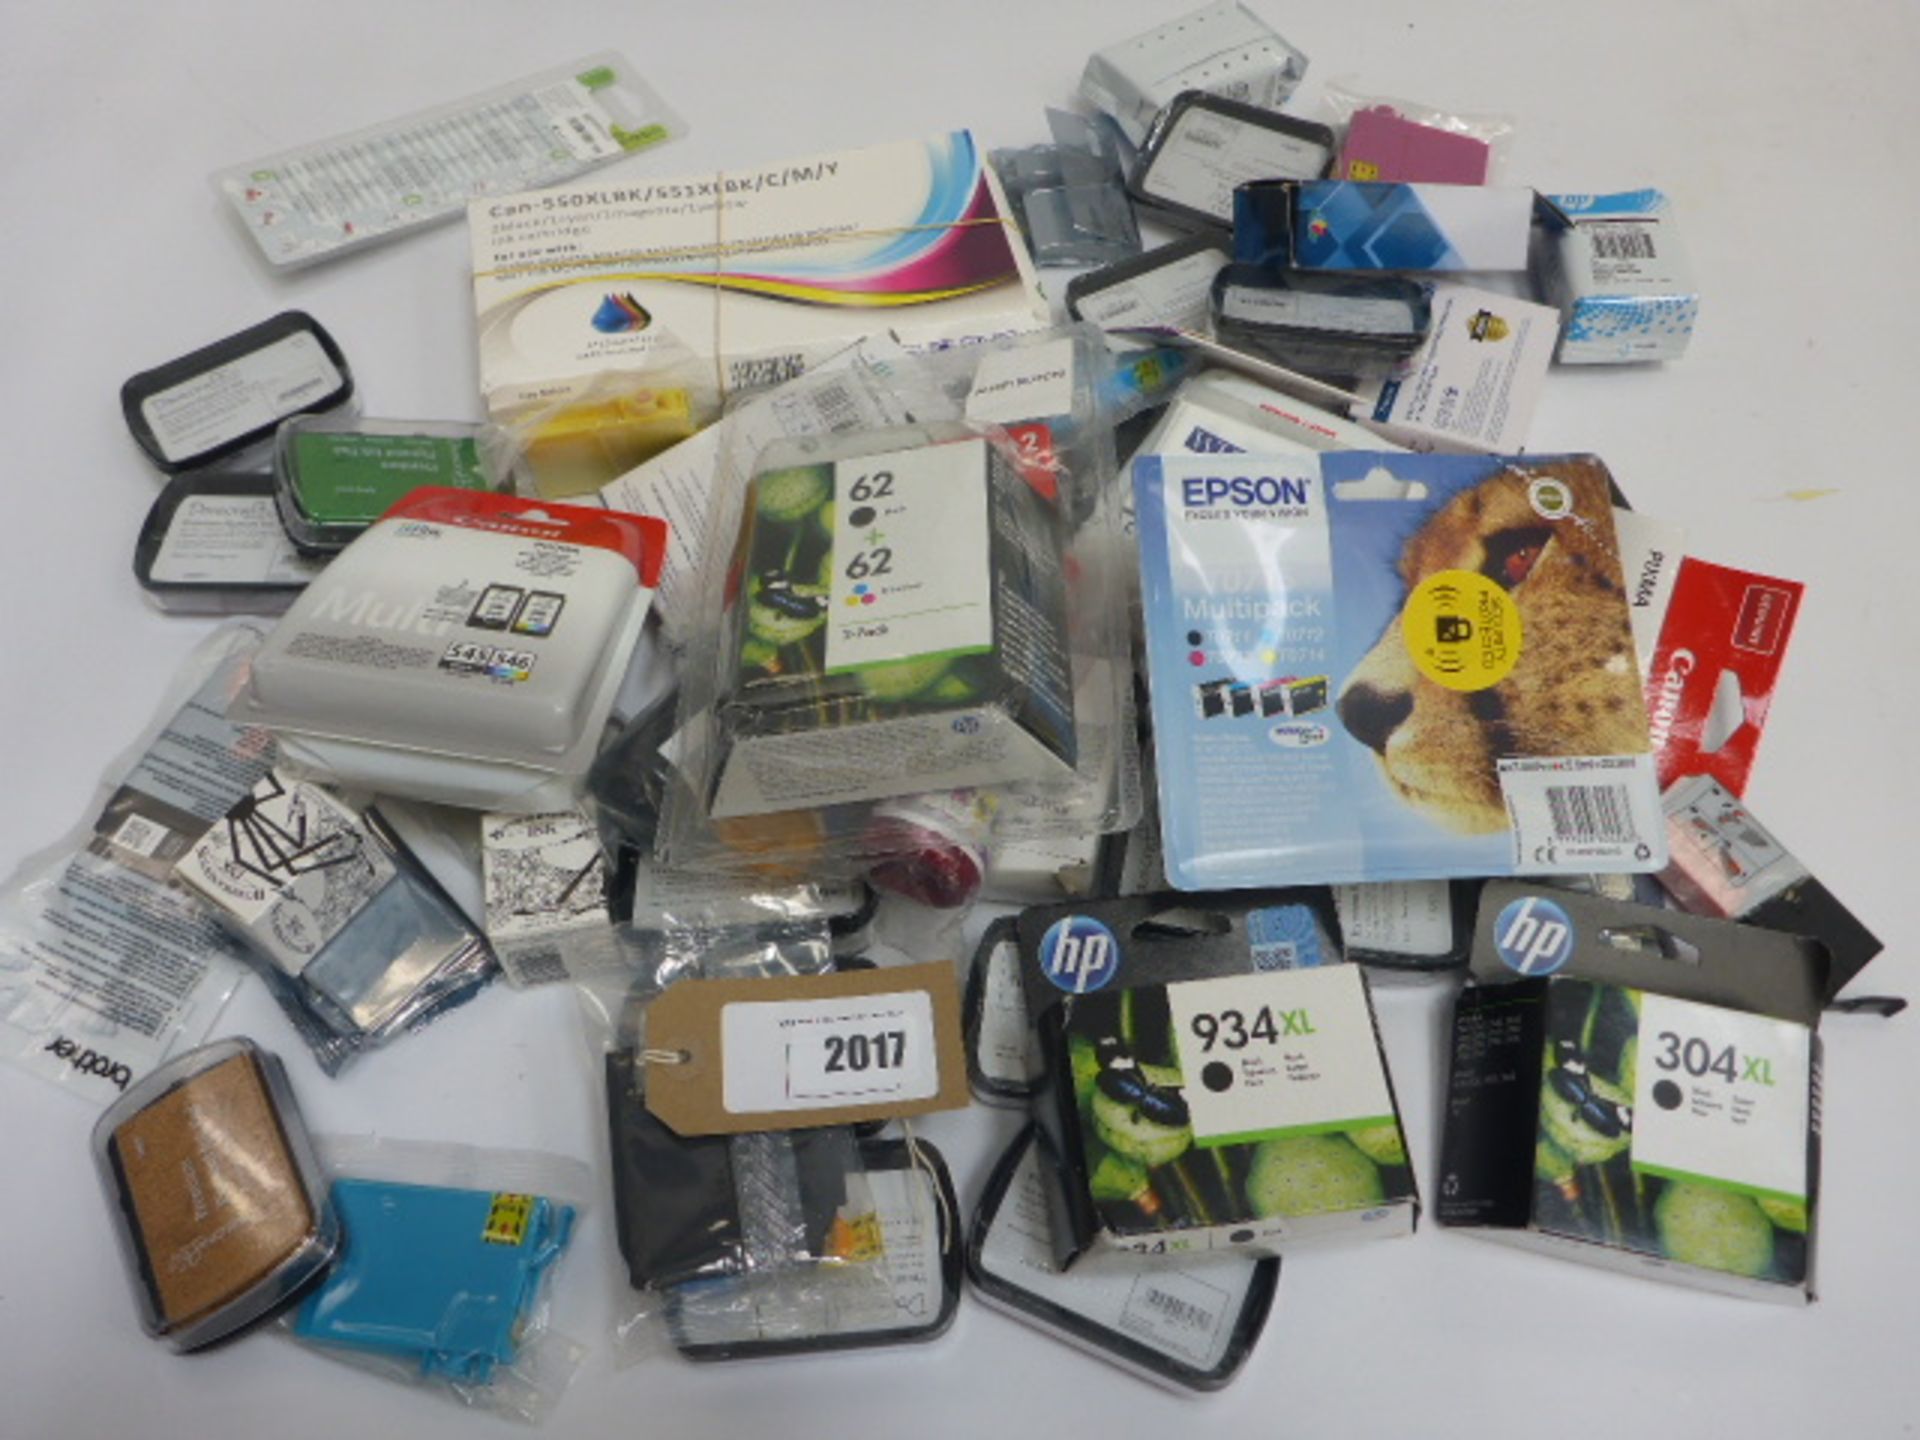 Bag containing various branded and unbranded printer ink cartridges